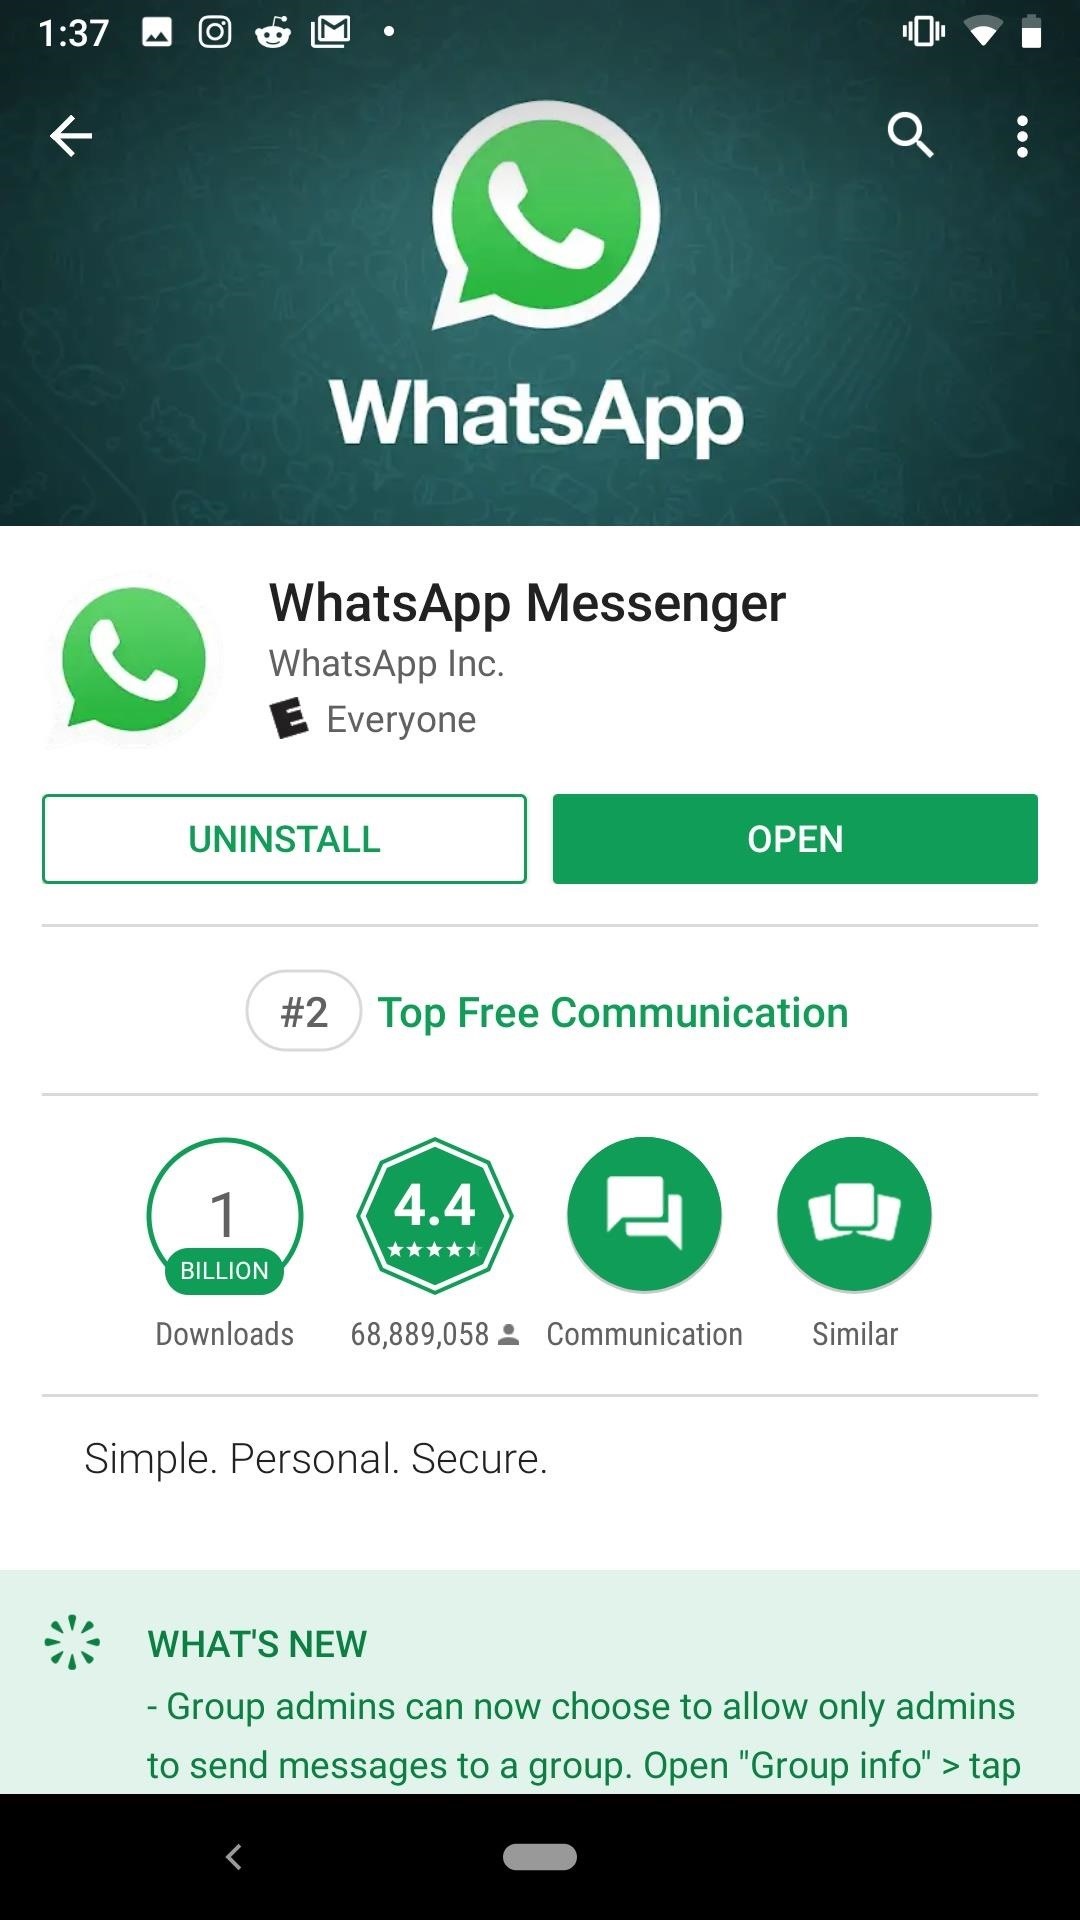 How to Get WhatsApp's Latest Features Before Anyone Else